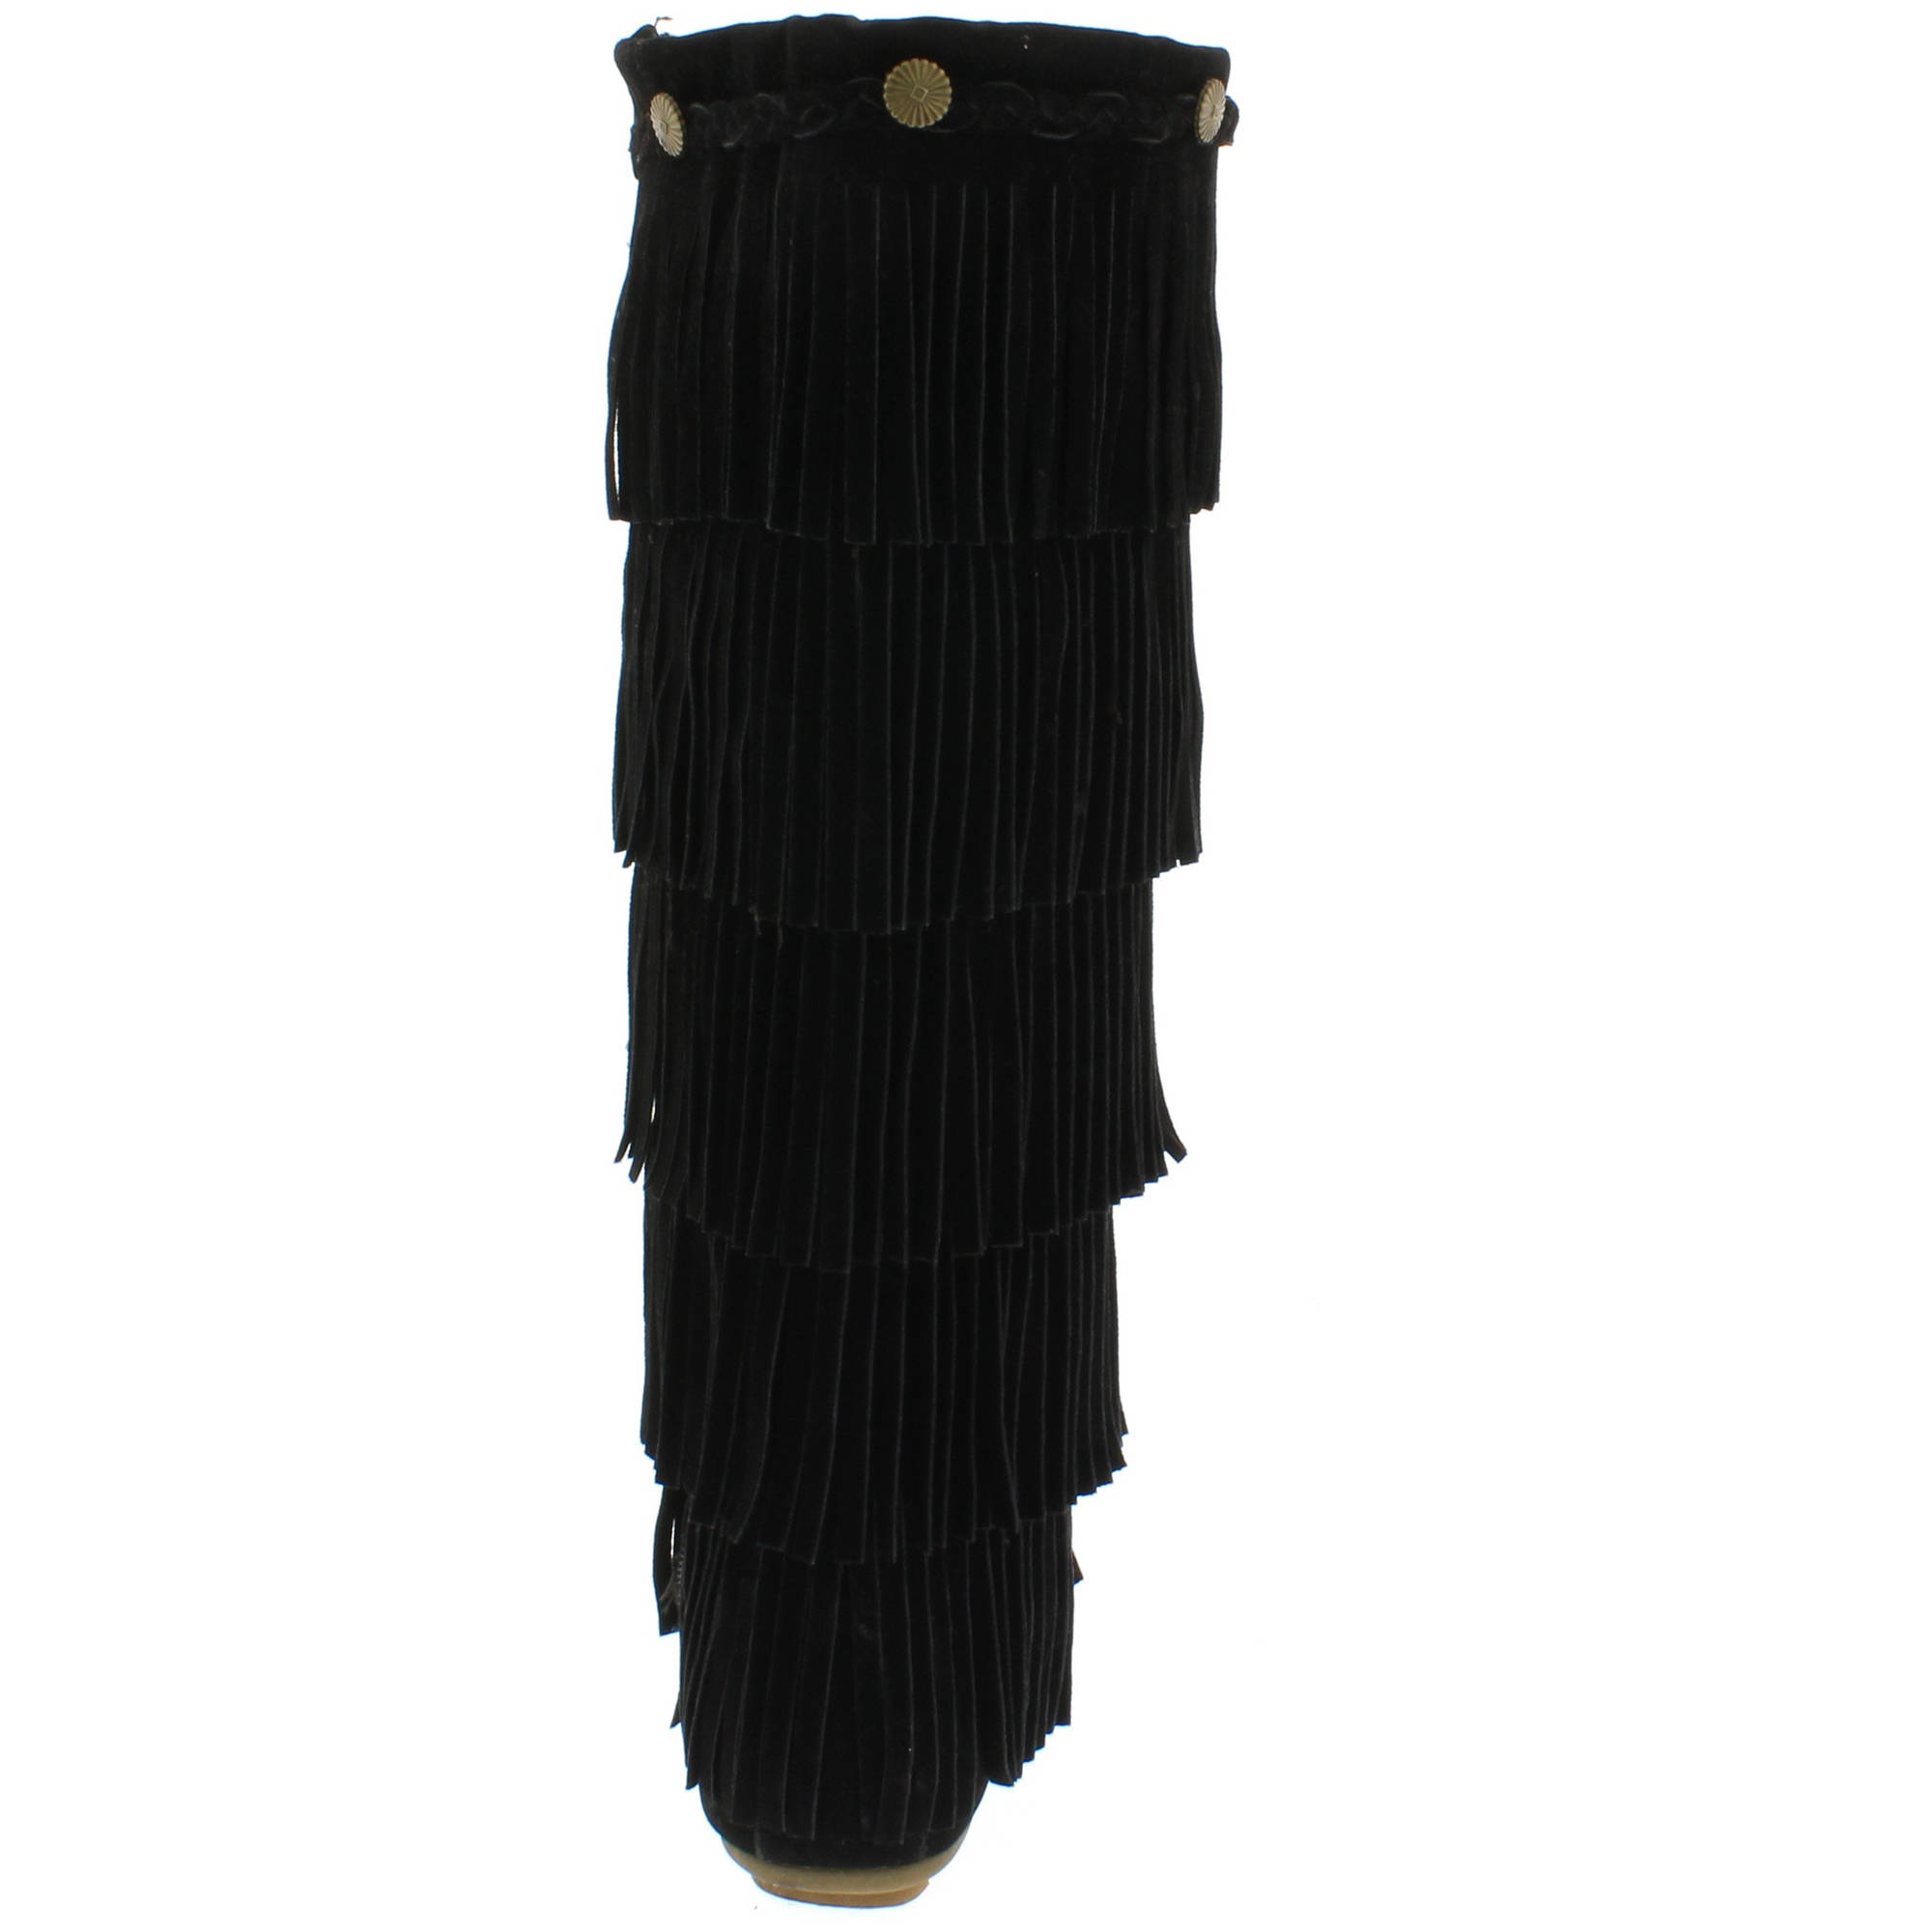 Shoes of Soul Women's Layer Fringe Boots - image 4 of 4